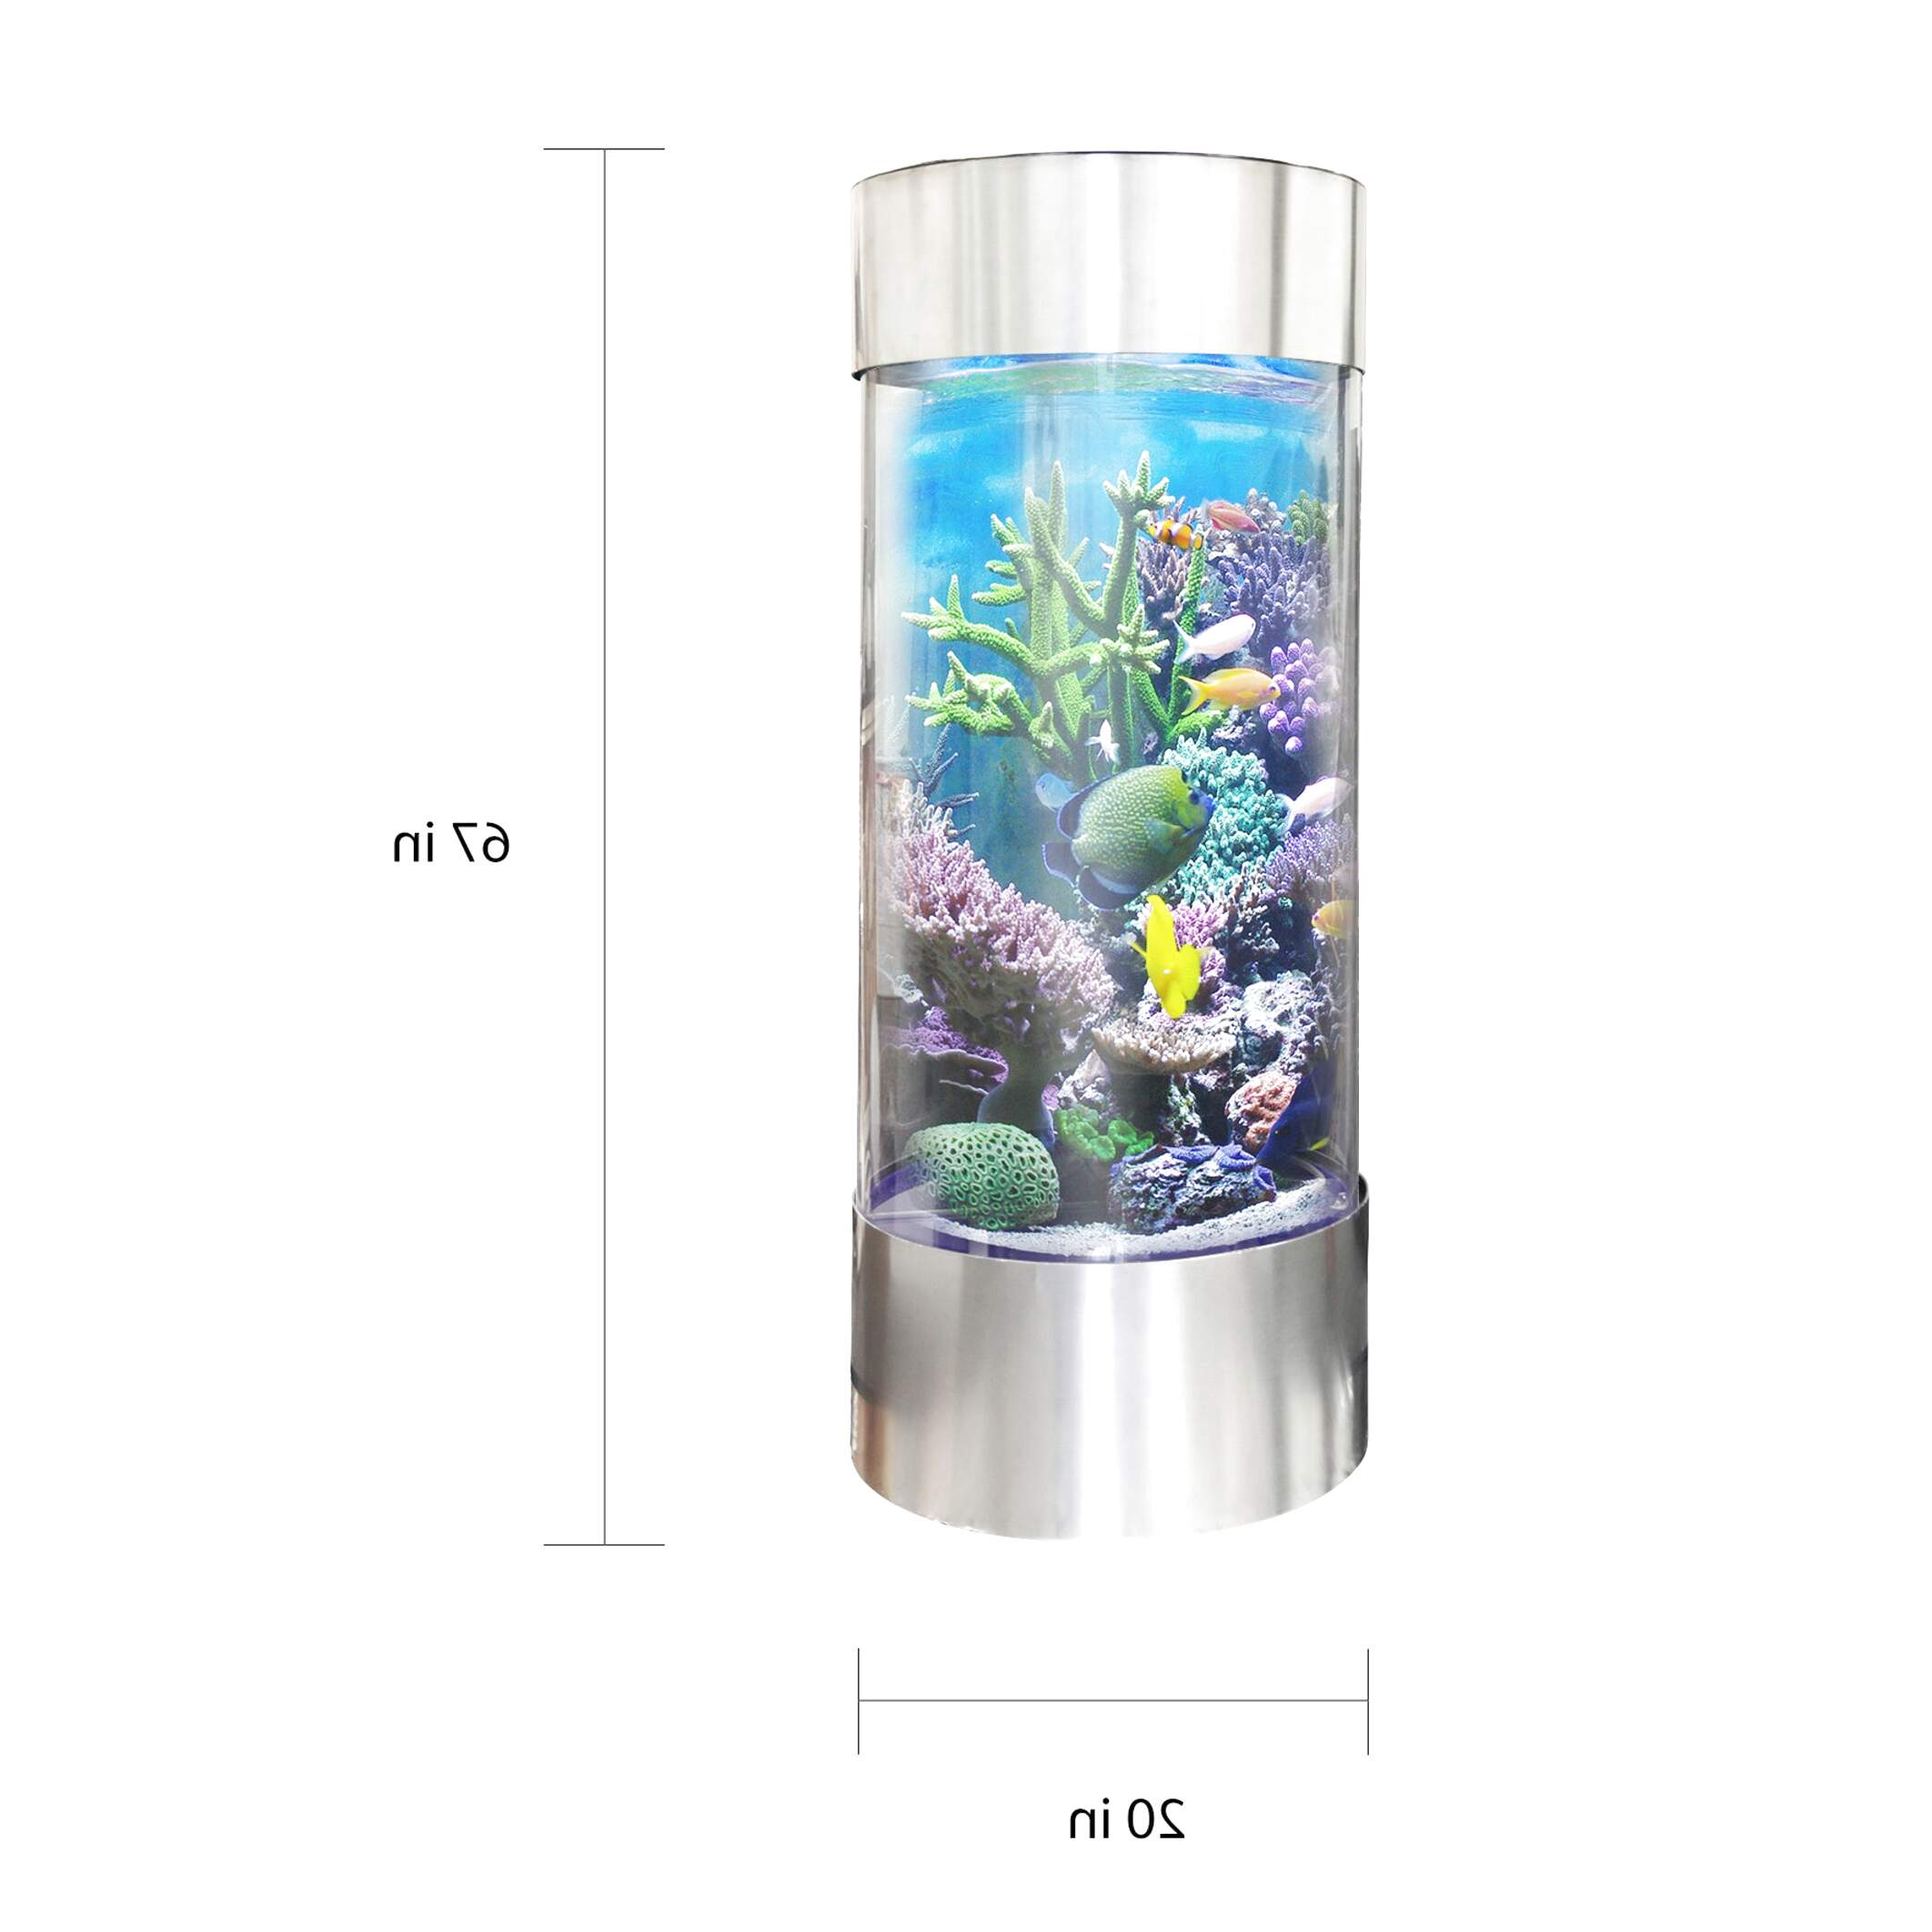 Cylinder Fish Tank for sale in UK View 60 bargains